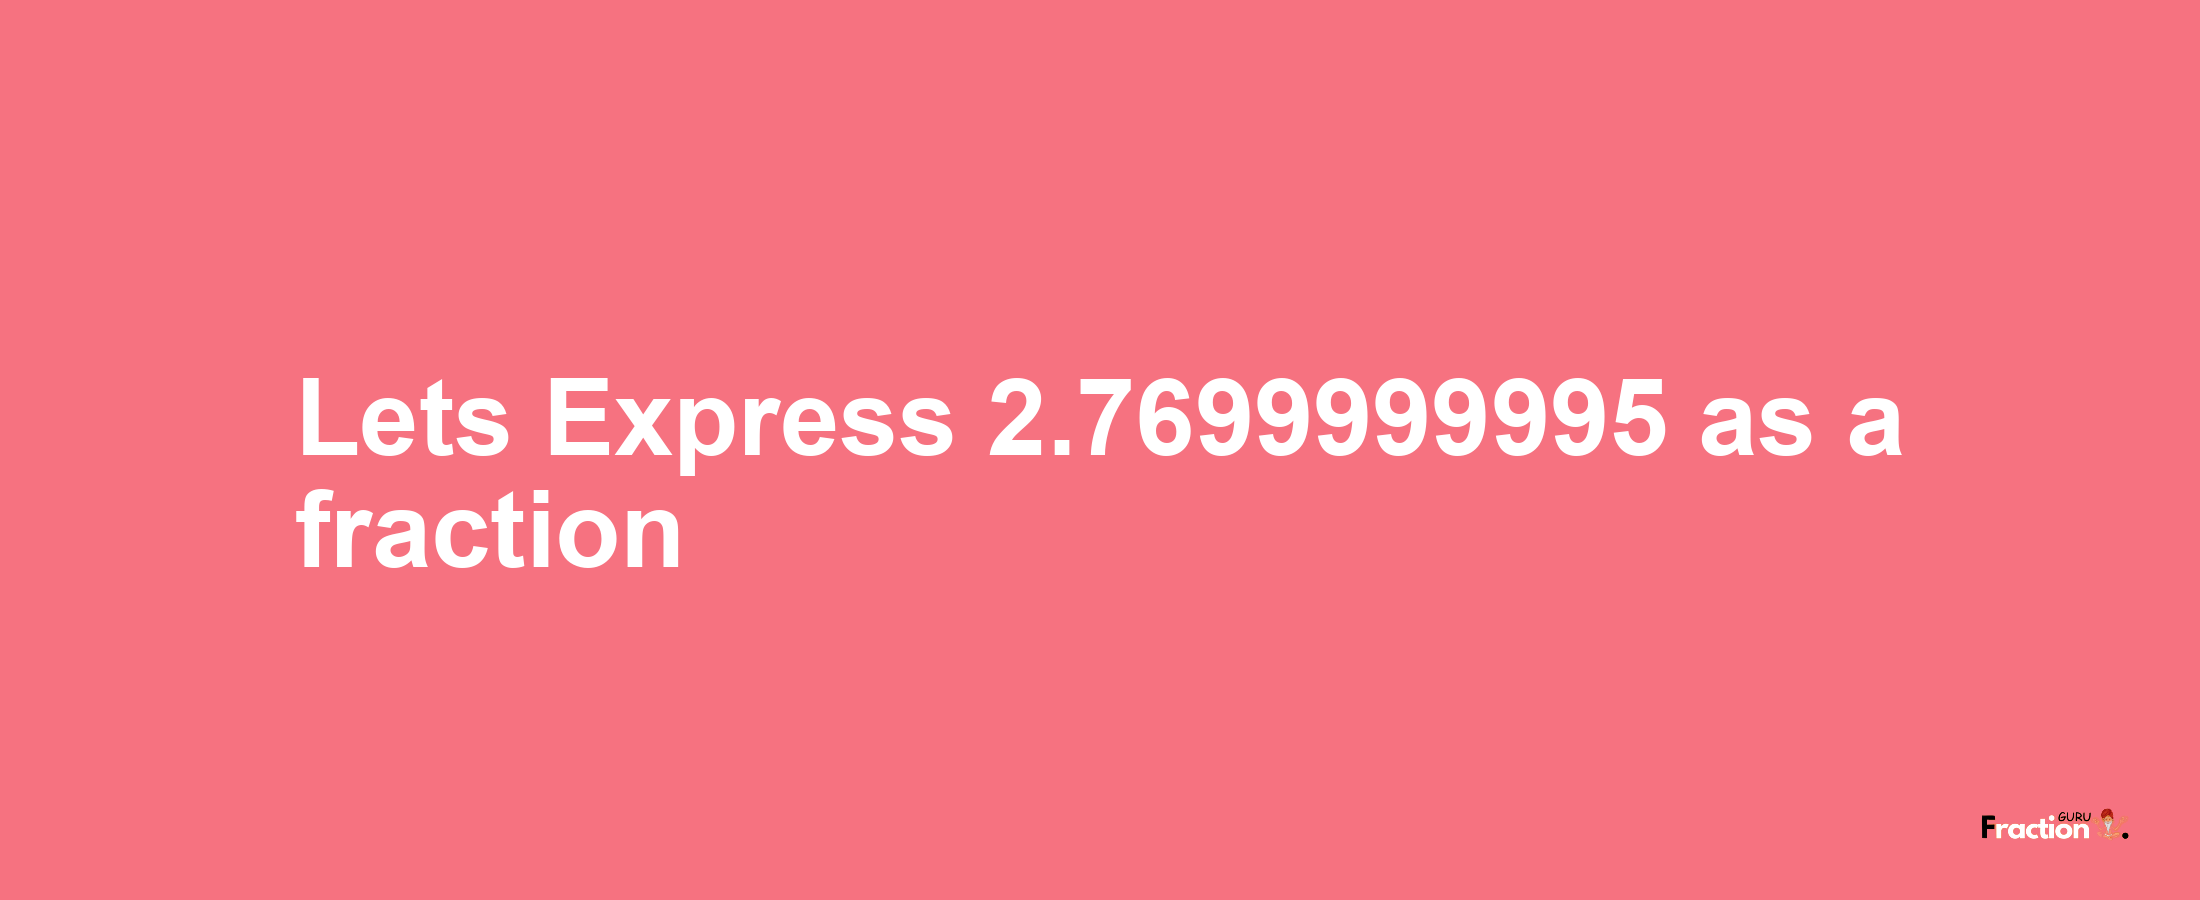 Lets Express 2.7699999995 as afraction